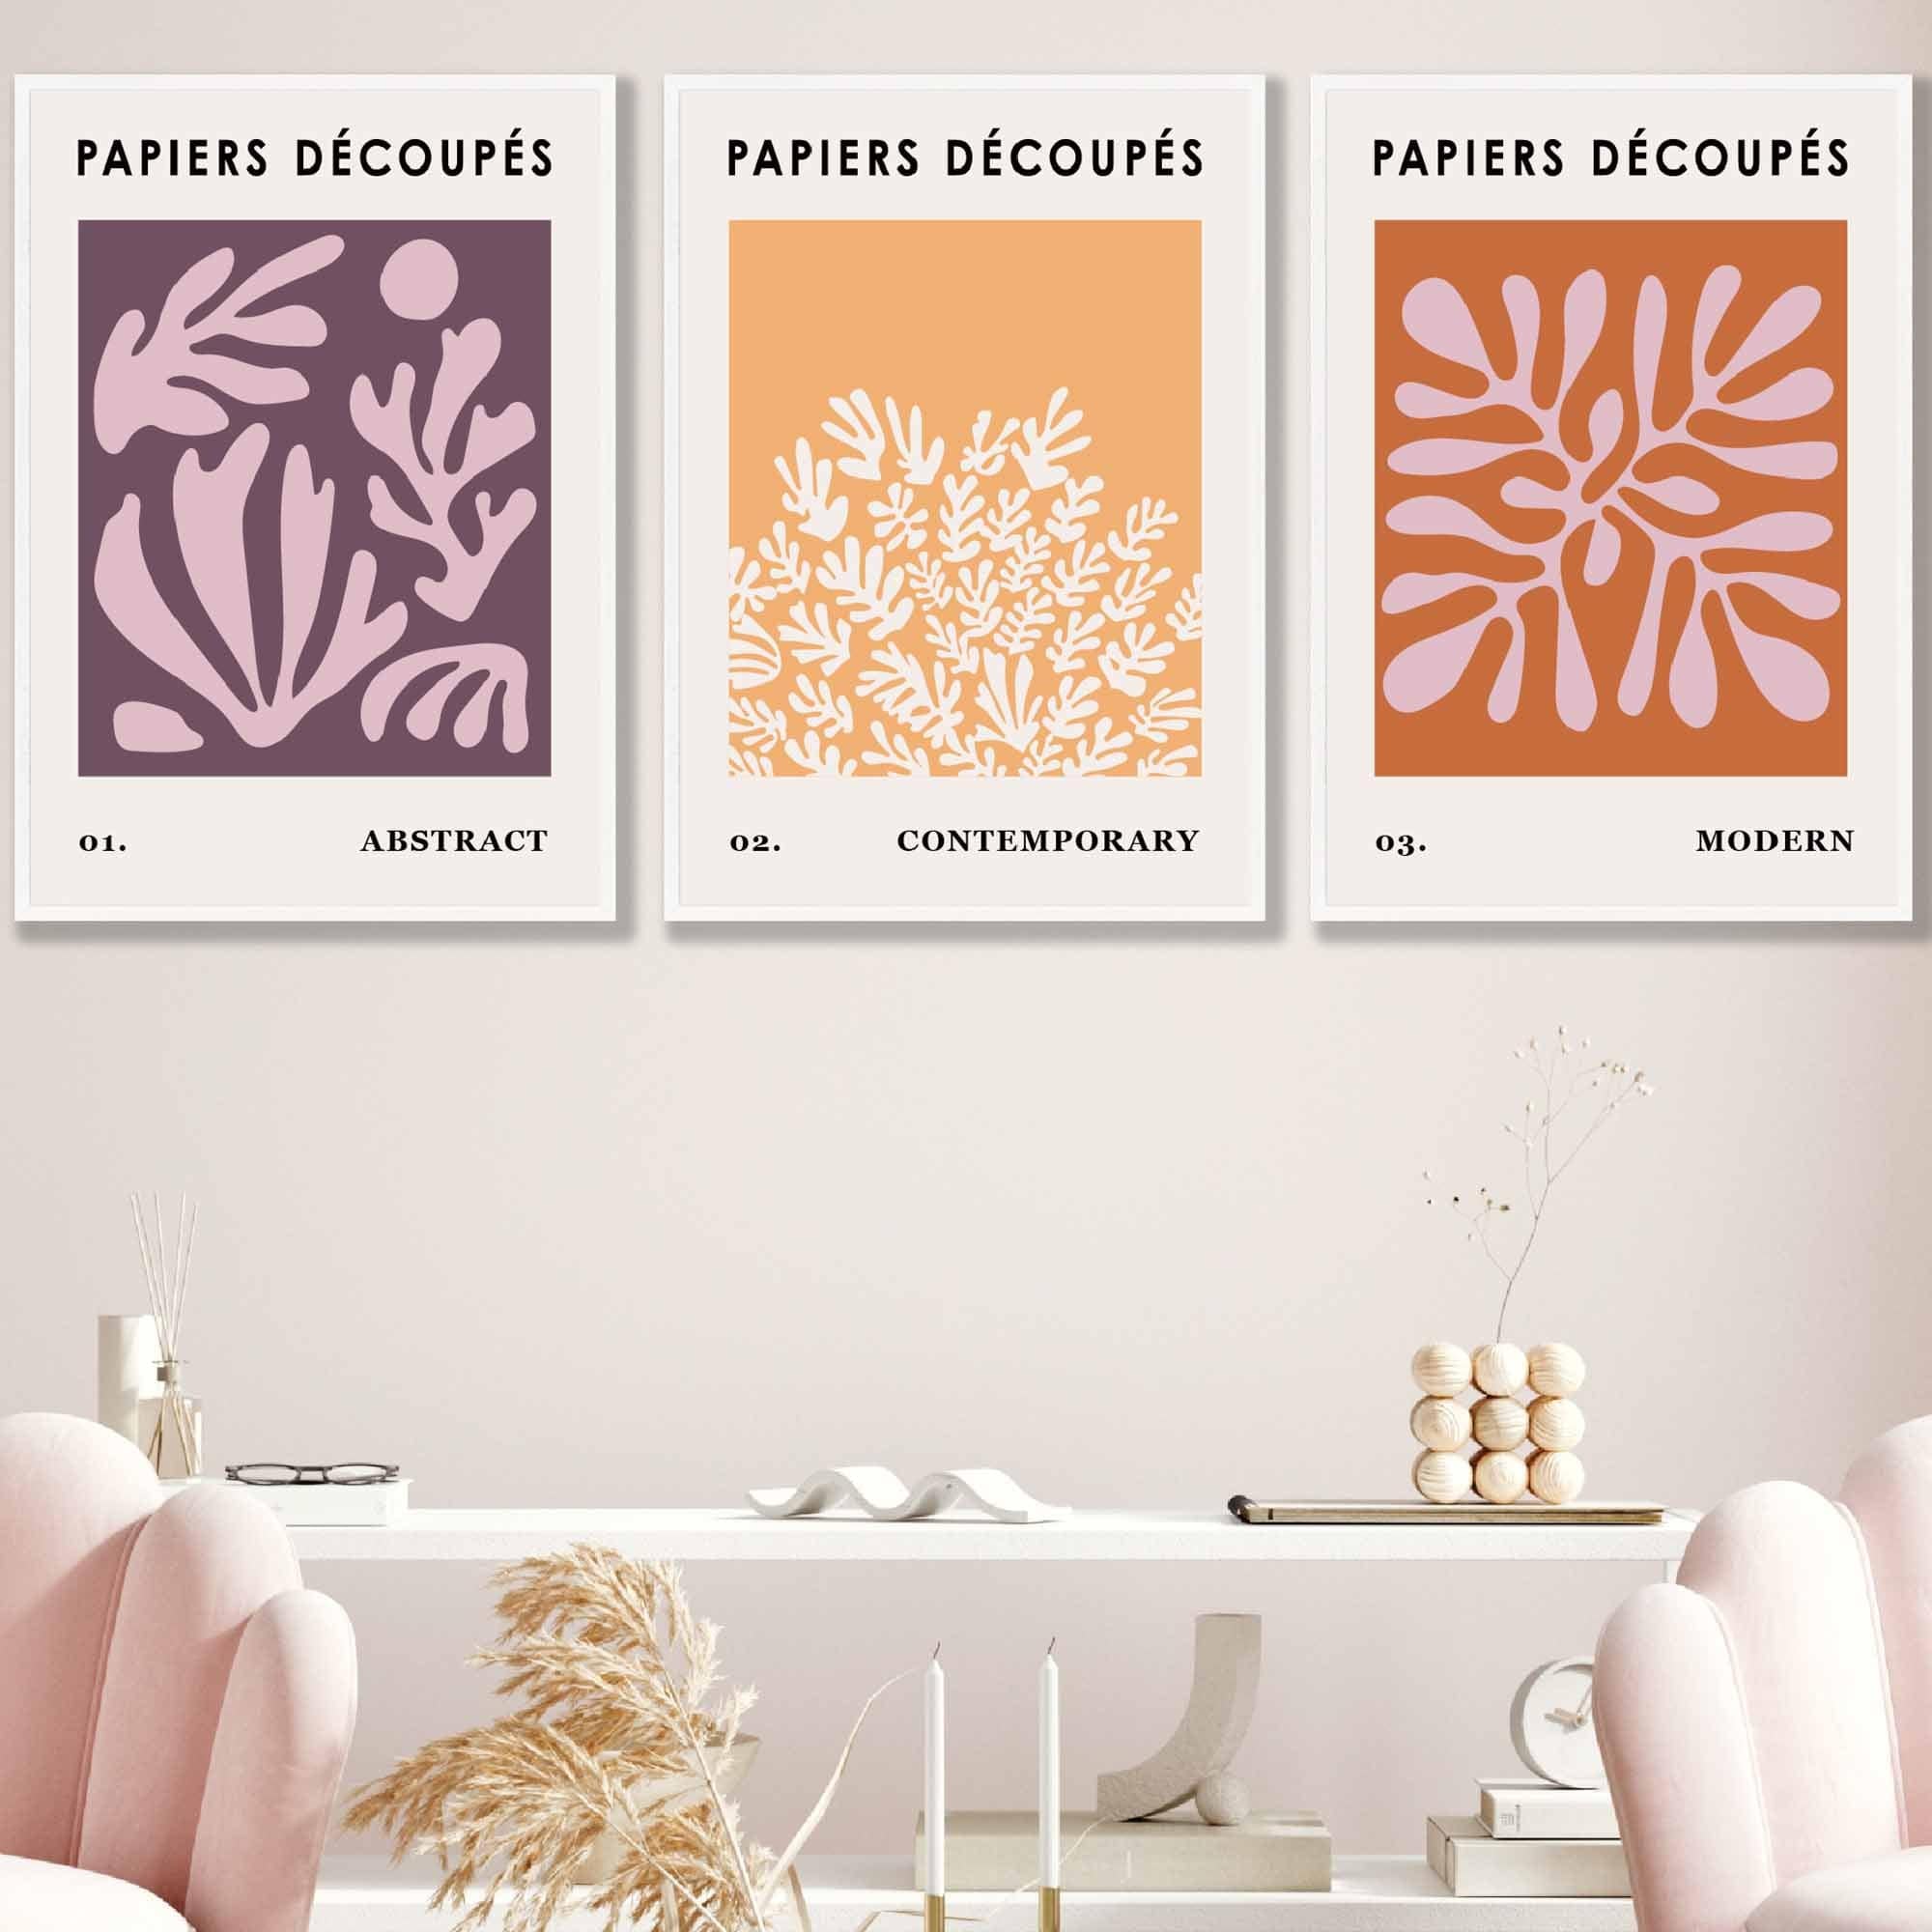 Matisse Floral Set of 3 Wall Art Prints in Purple, Orange and Yellow